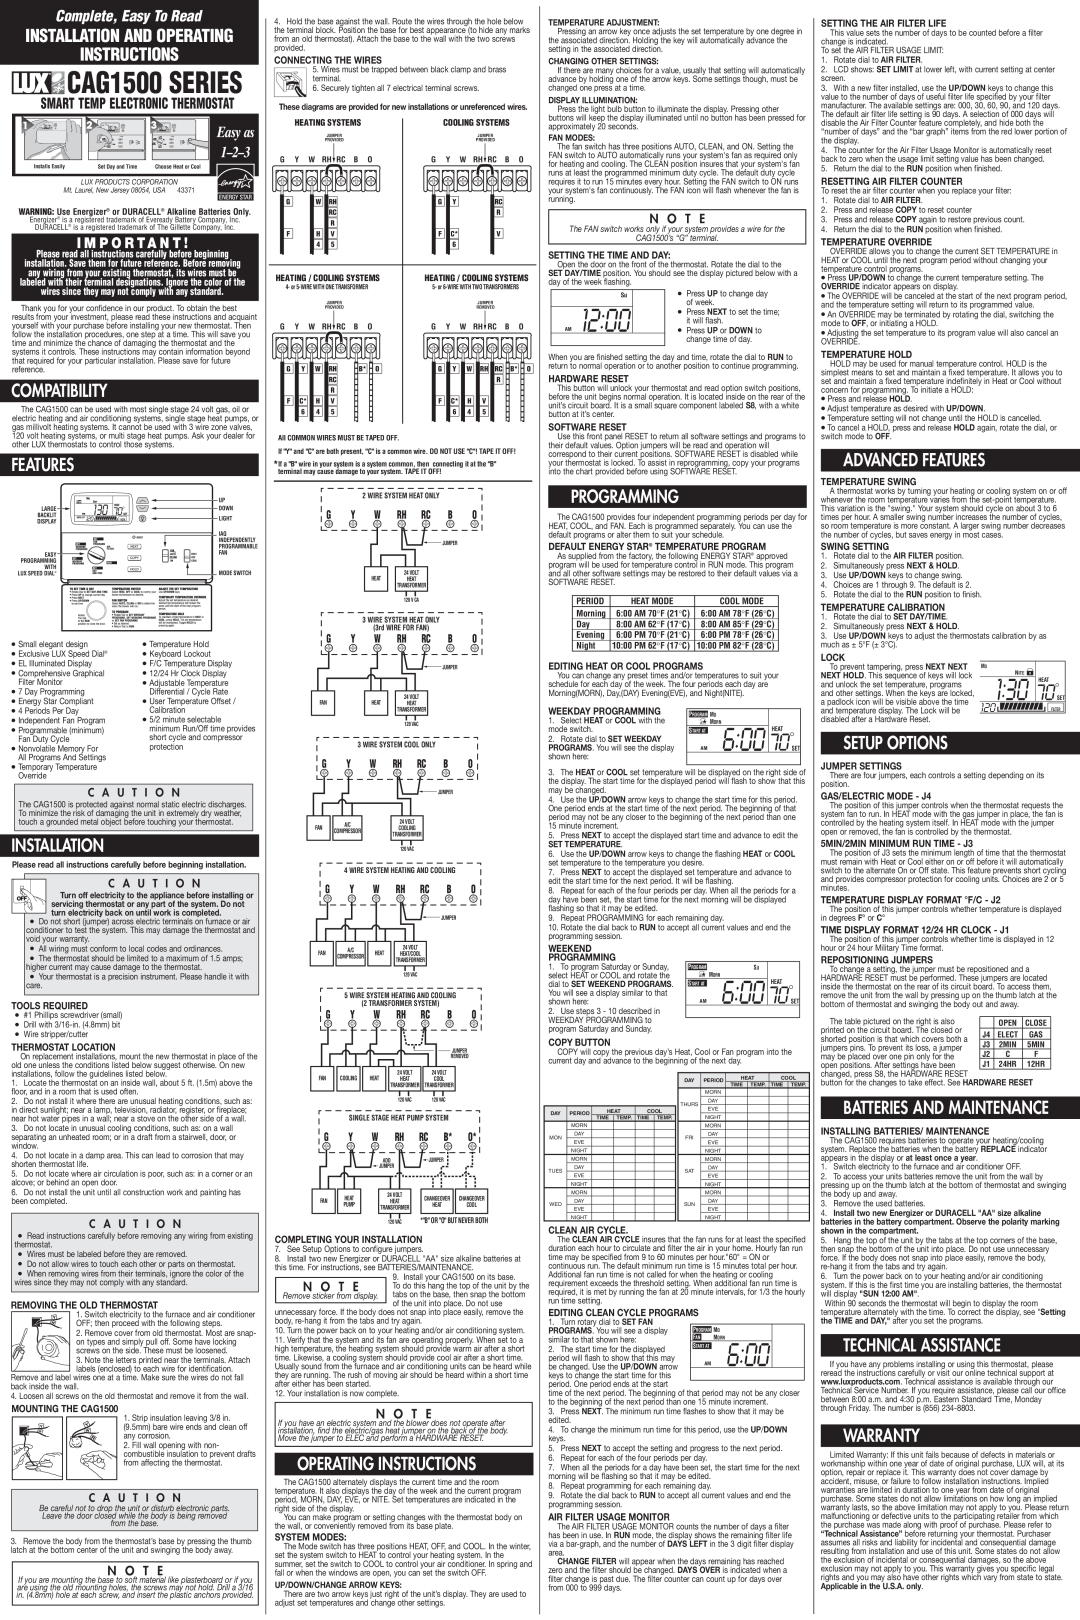 Lux Products operating instructions CAG1500 SERIES, 130 70 SET, Set, Instructions, Compatibility, Features, Programming 